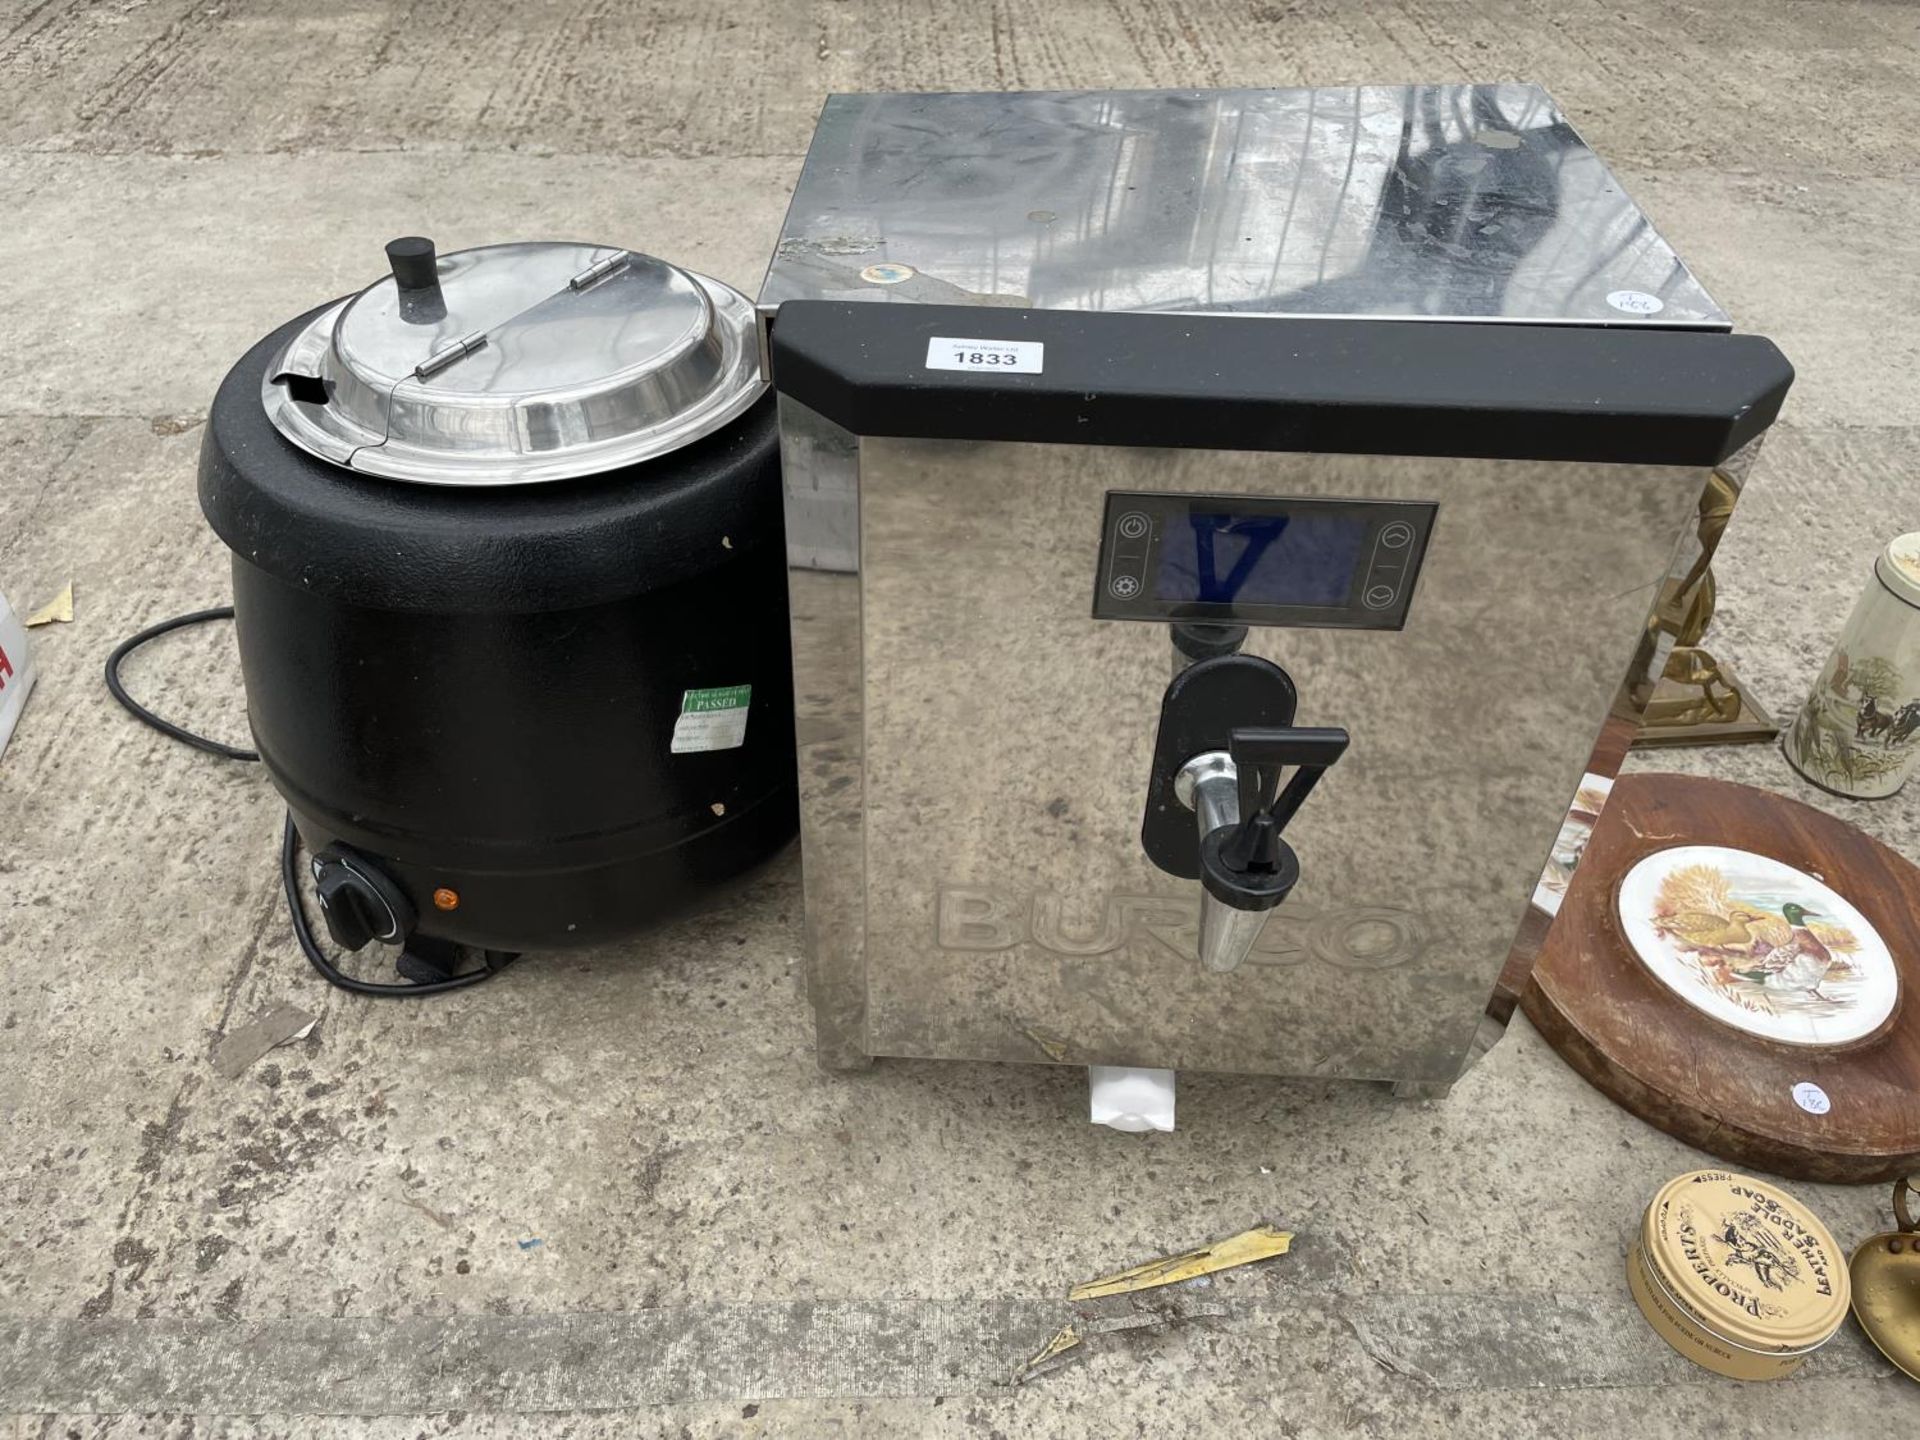 A WATER HEATER AND A SOUP KETTLE